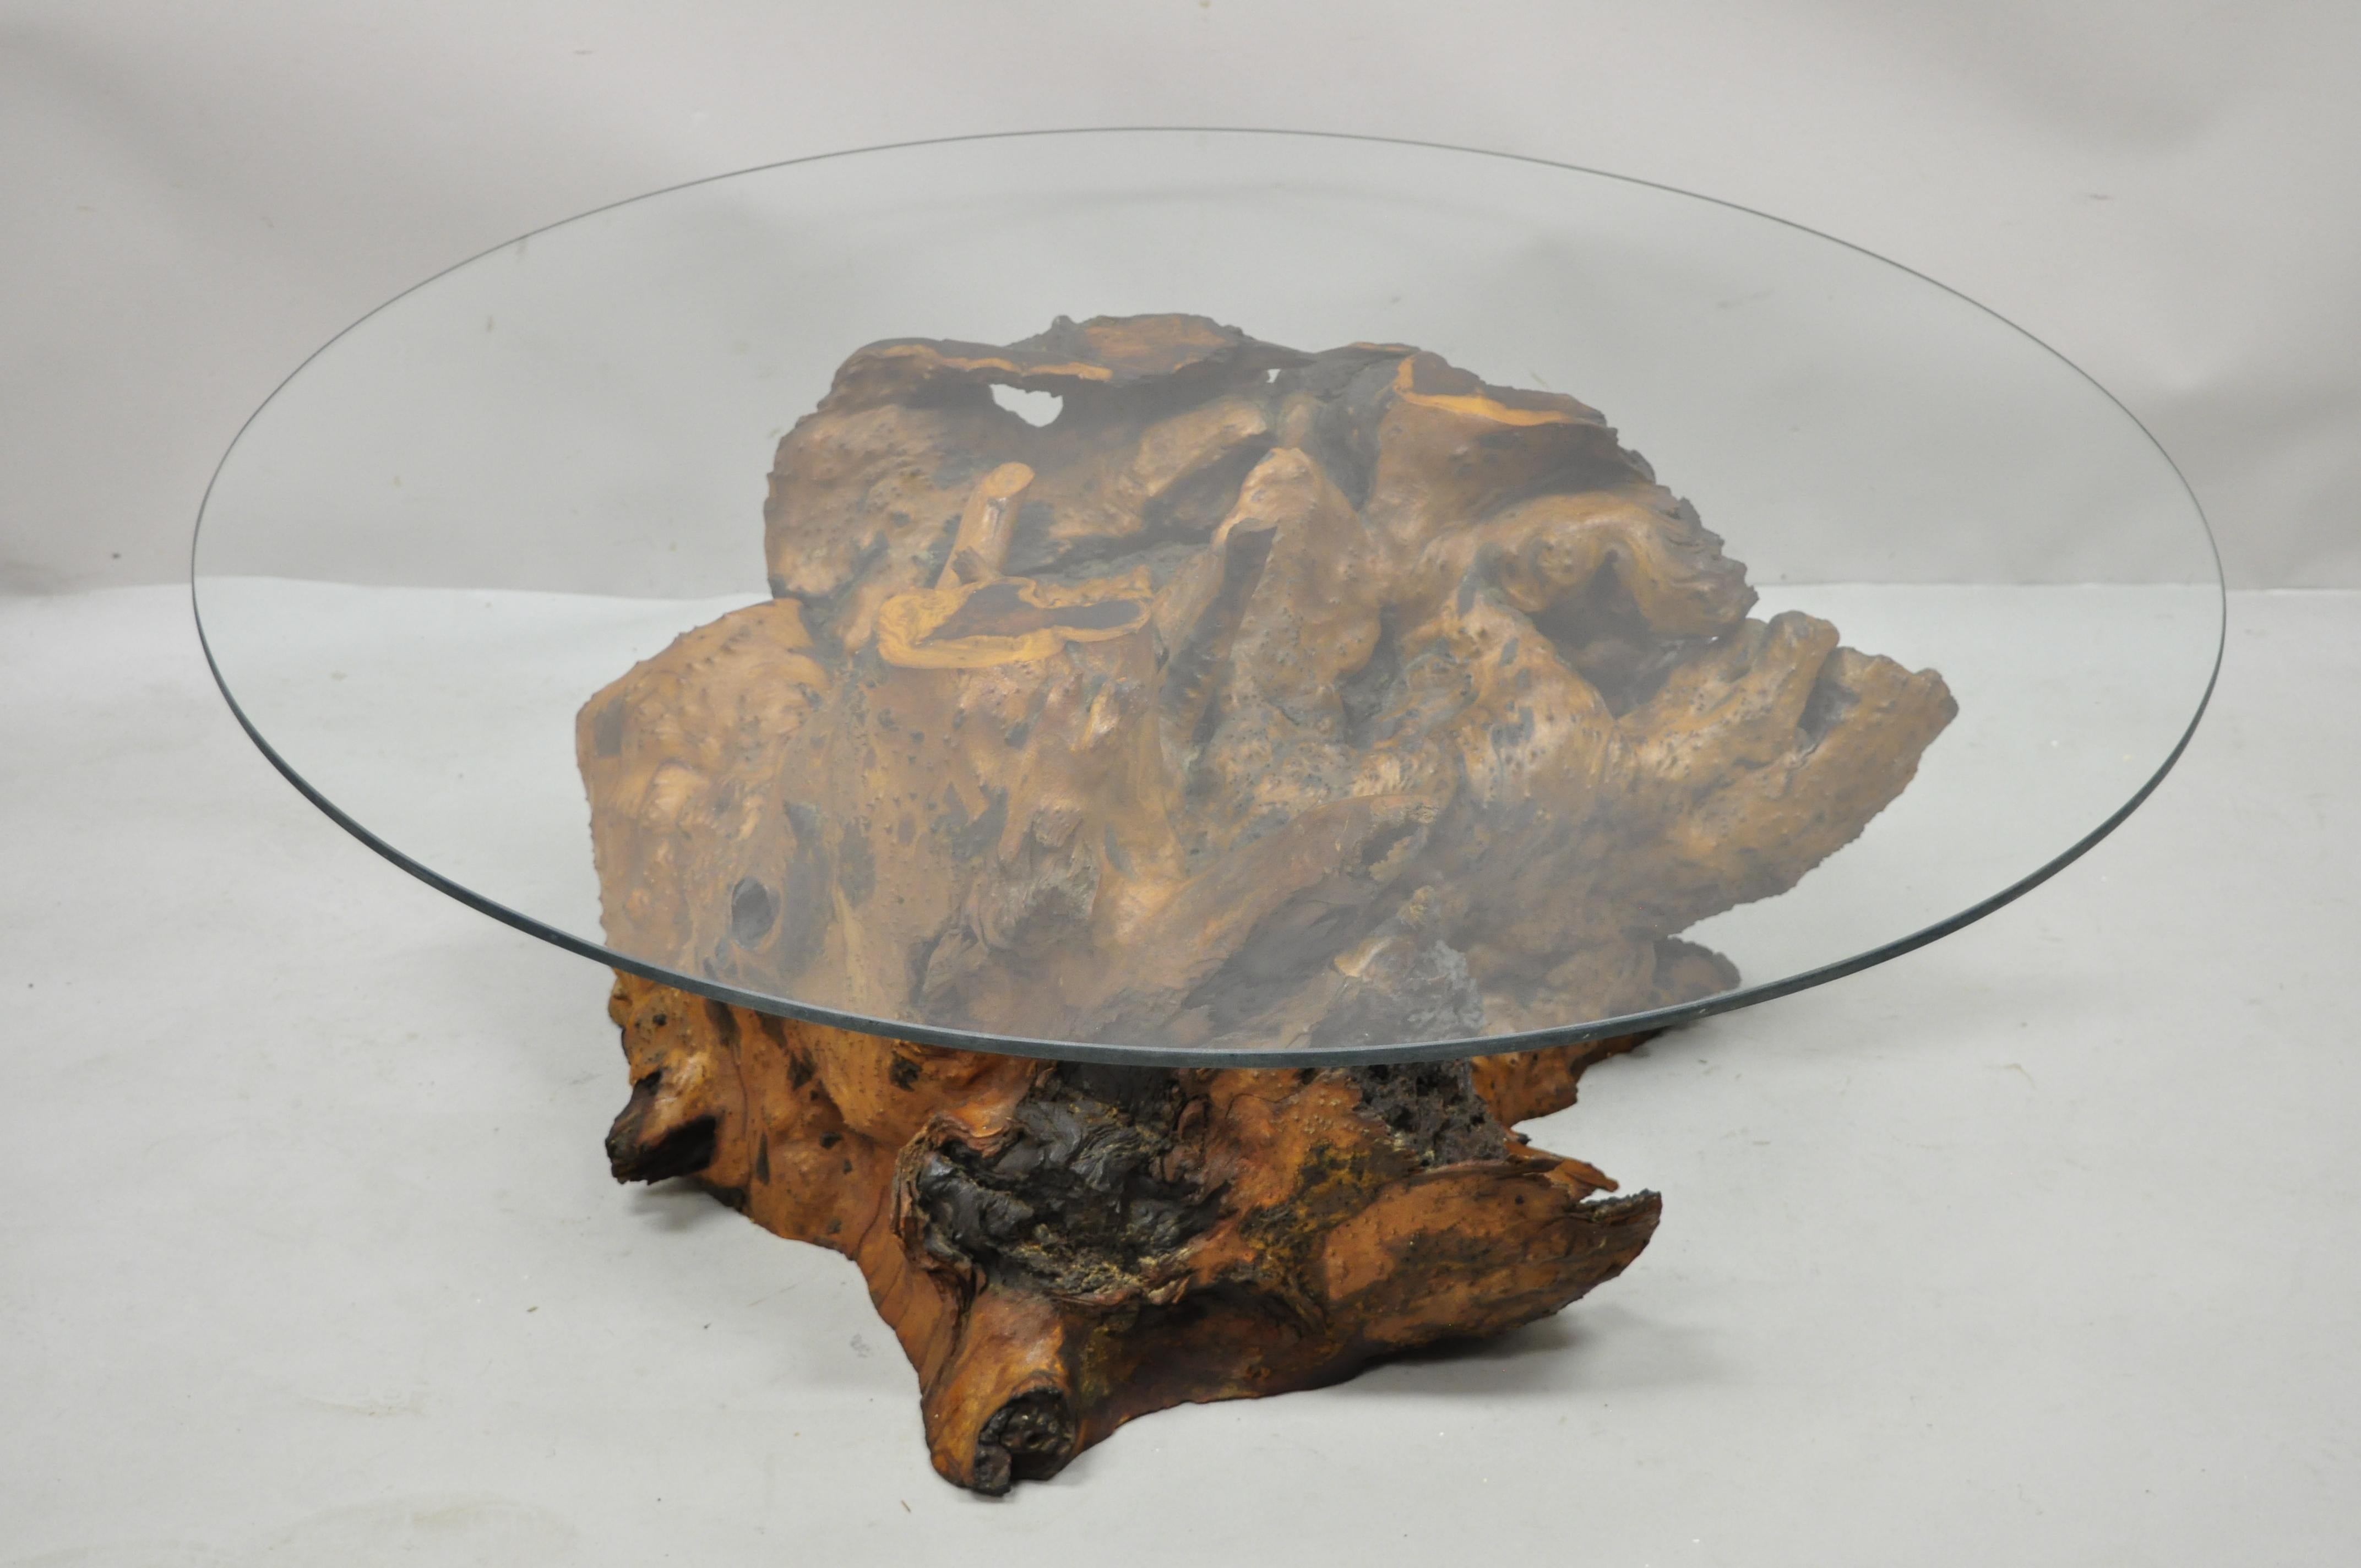 Burl Wood Organic Free Form Live Edge Driftwood Coffee Table Round Glass Top For Sale 3